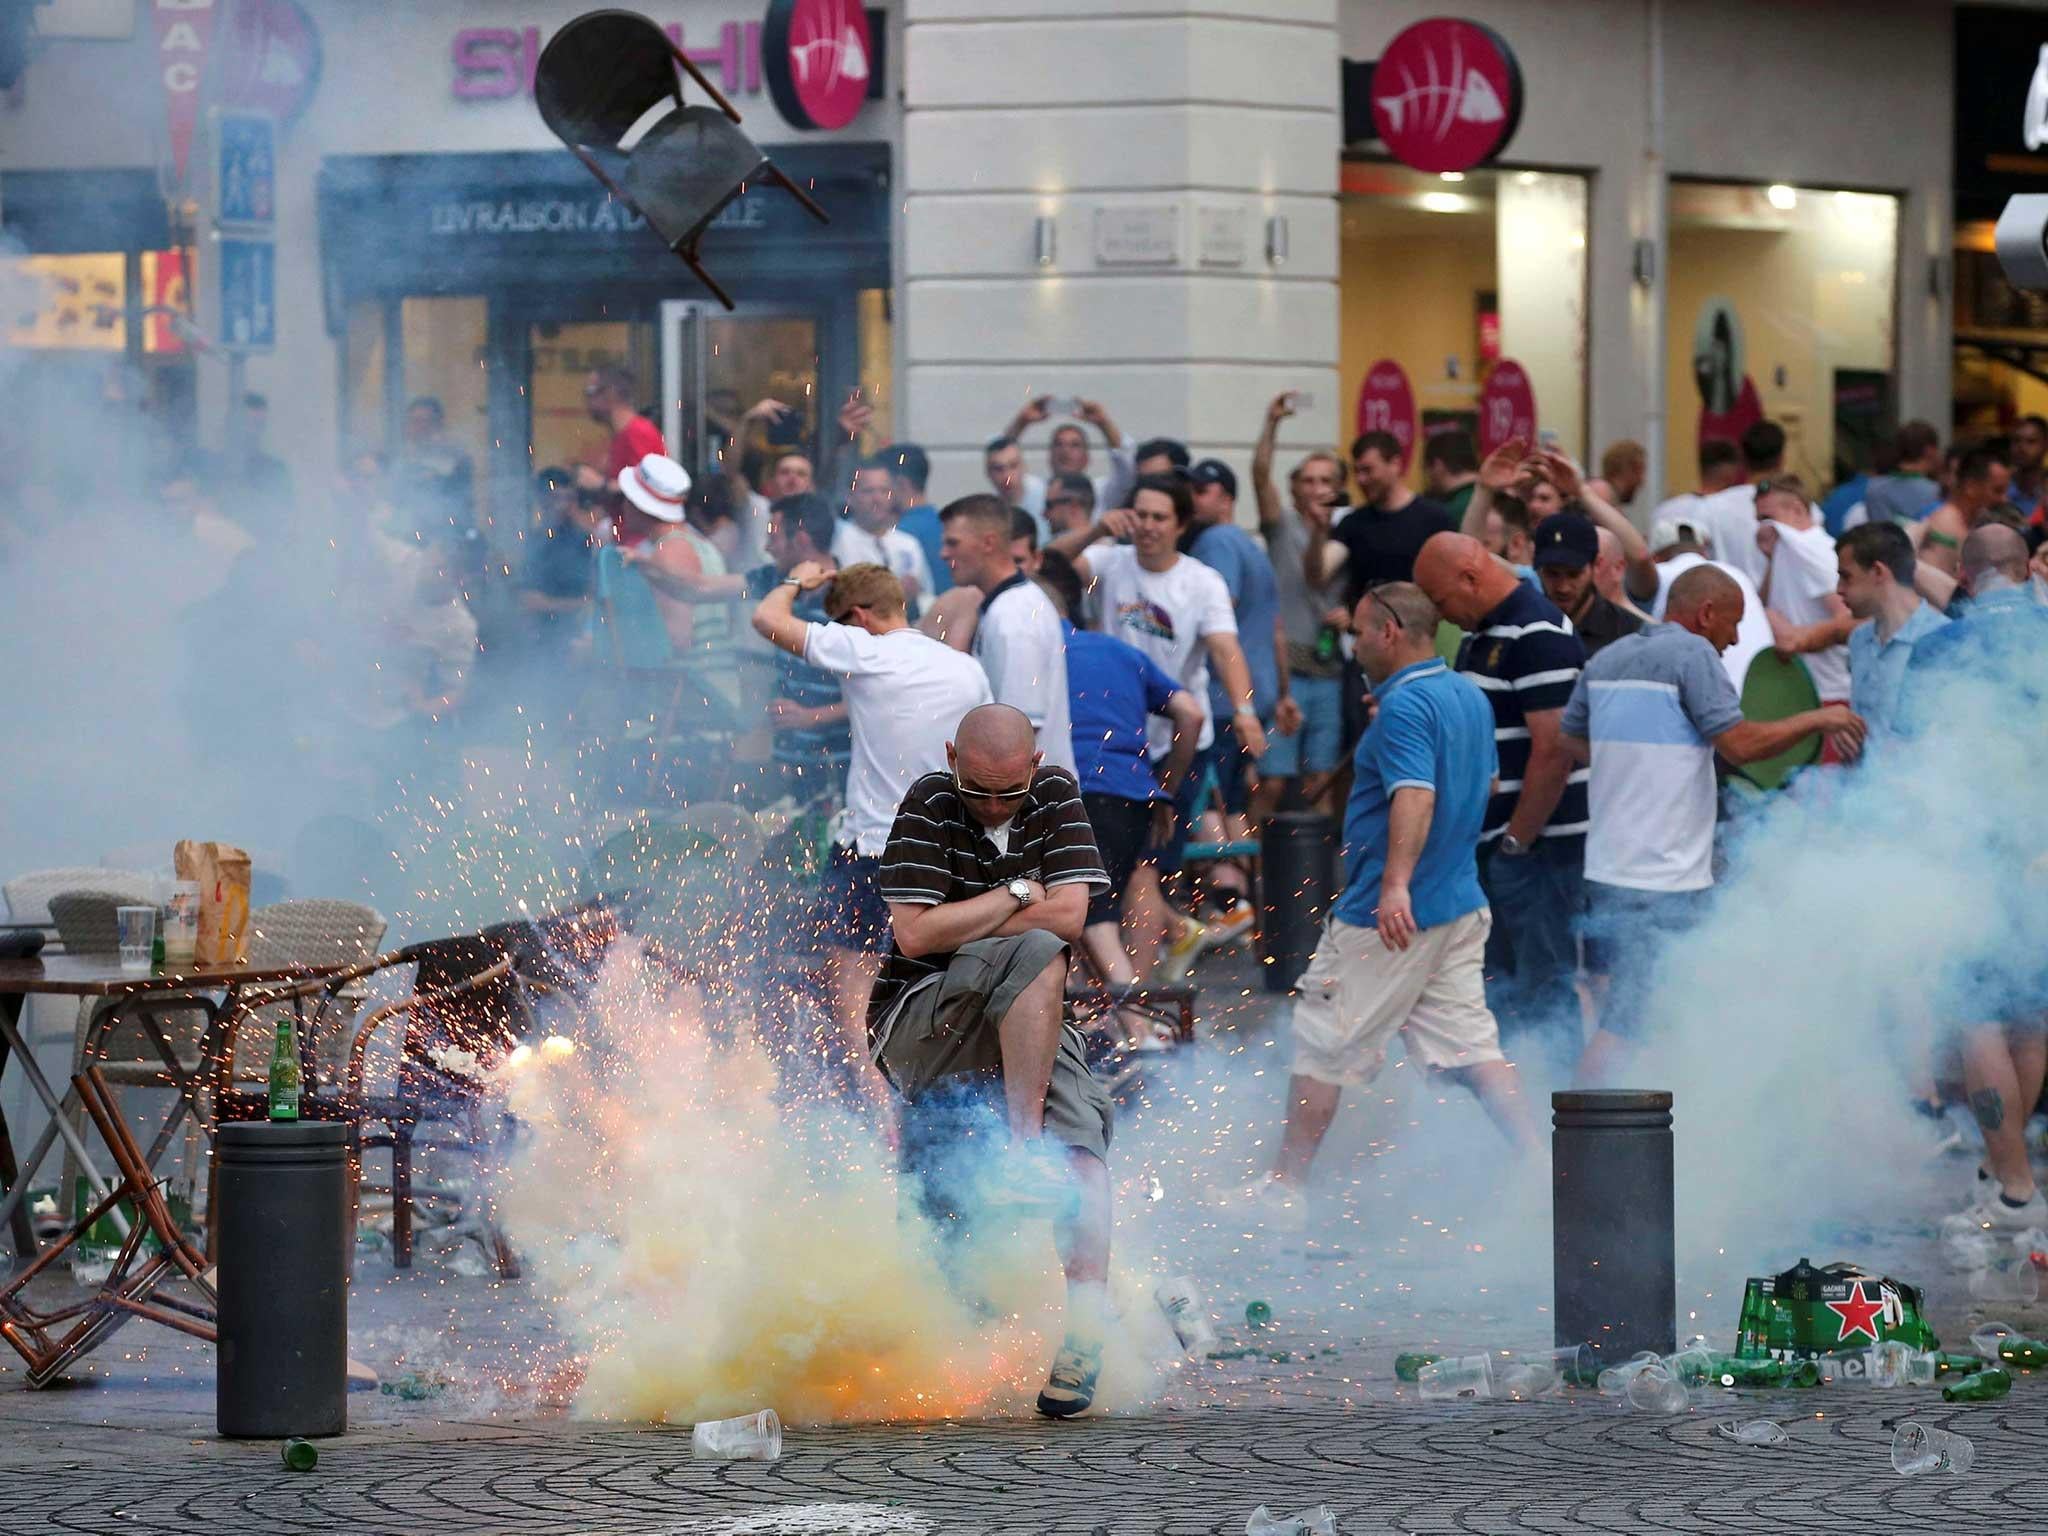 A teargas grenade explodes near an England fan ahead of England's EURO 2016 match in Marseille, as French authorities struggle to prevent violence spreading between football supporters 